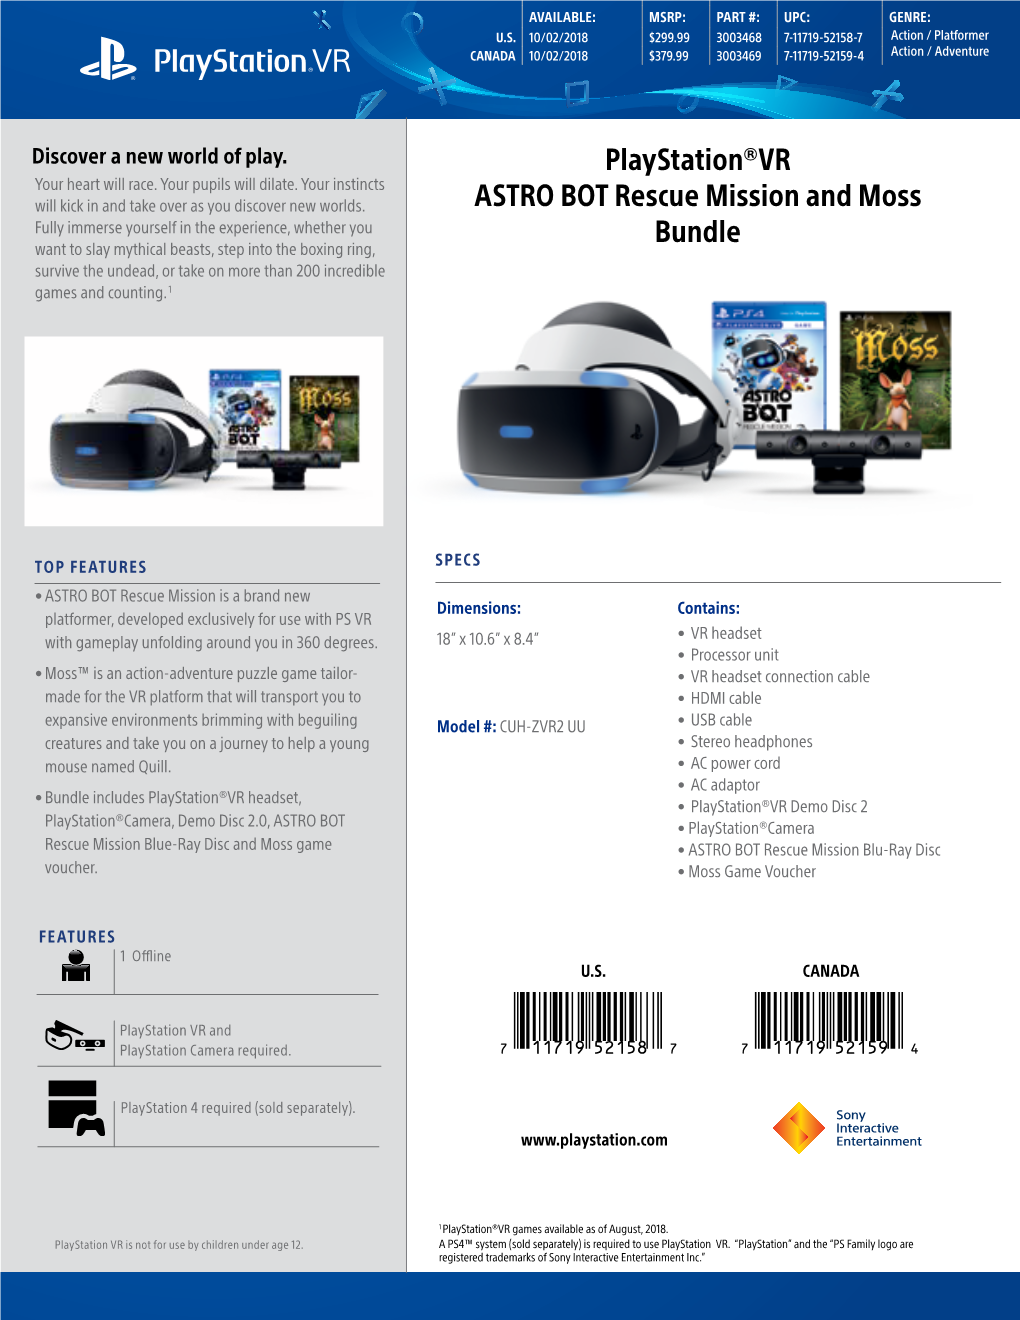 Playstation®VR ASTRO BOT Rescue Mission and Moss Bundle